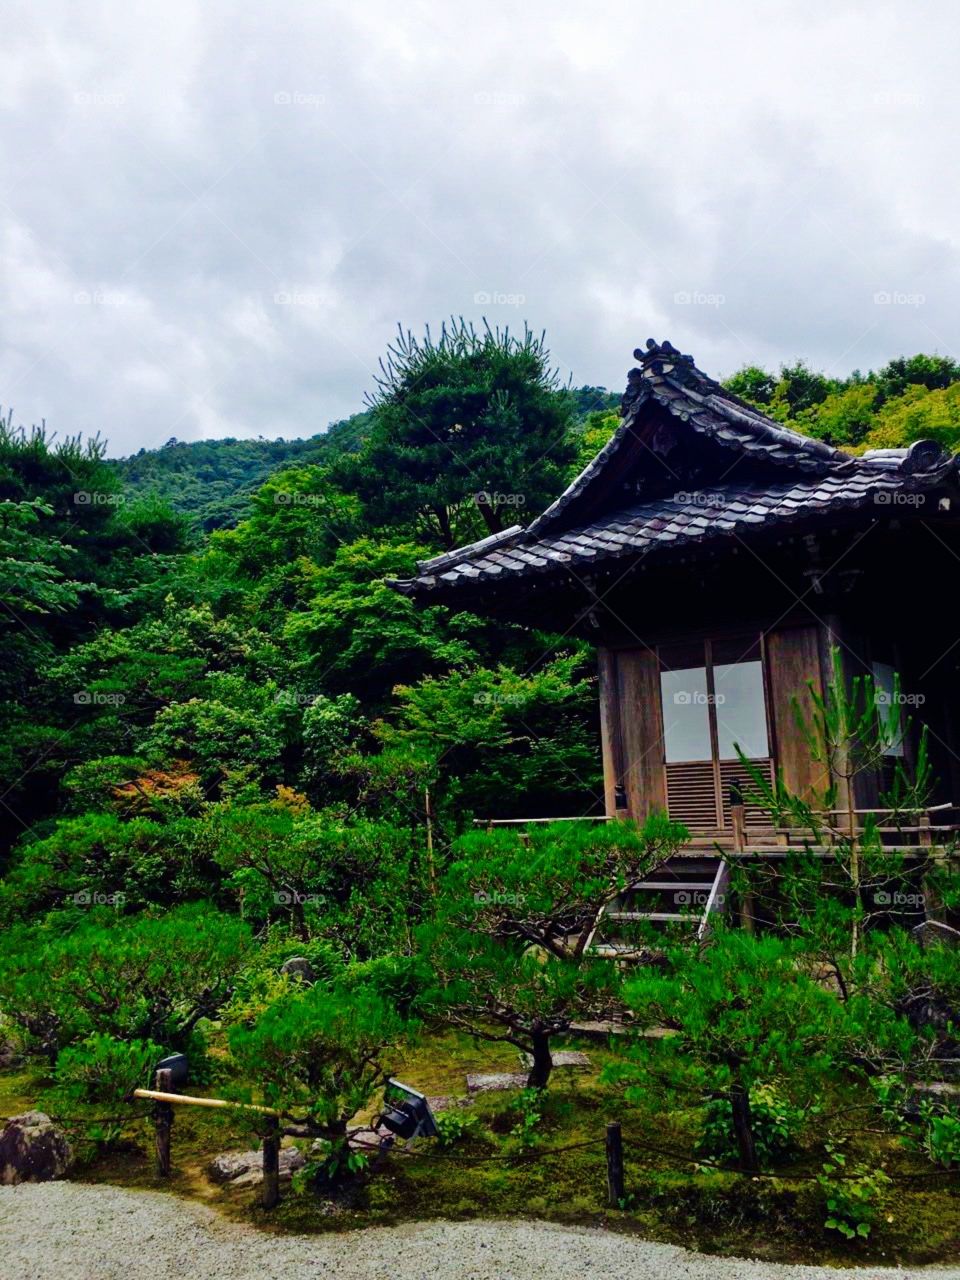 this is a traditional japanese house